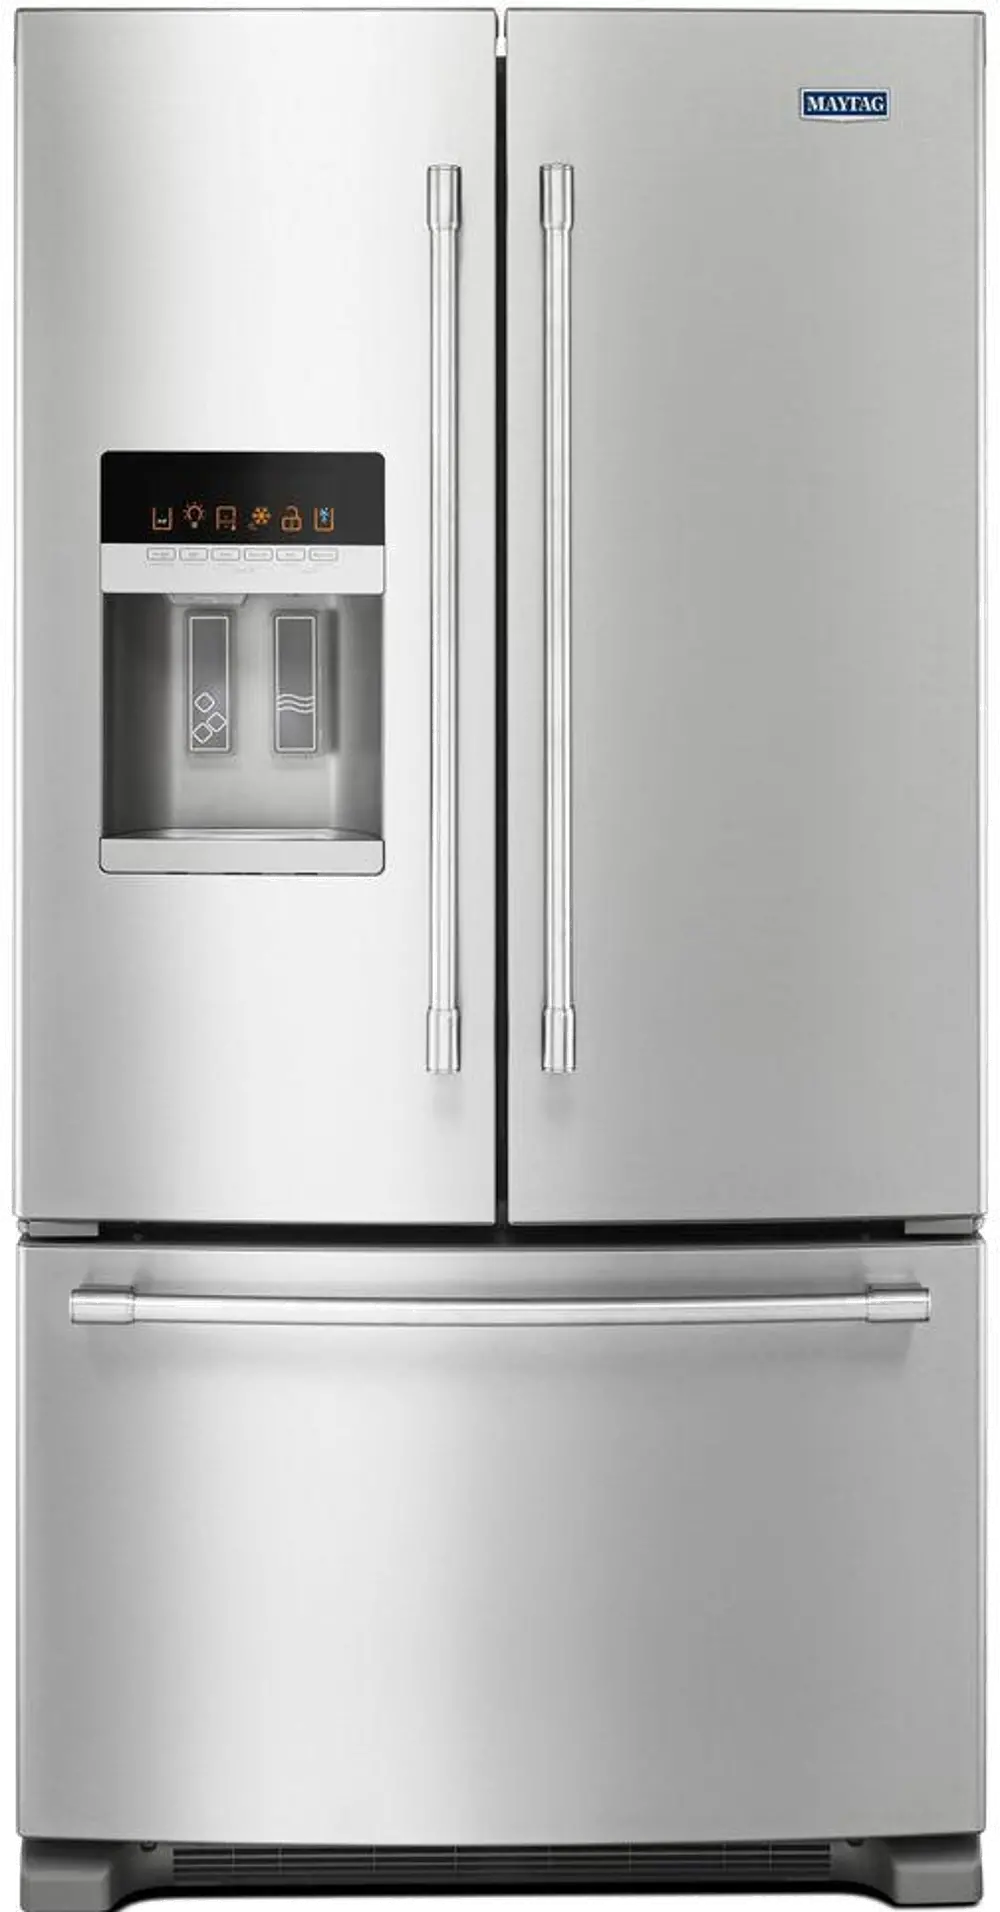 MFI2570FEZ Maytag 24.7 cu ft French Door Refrigerator - Stainless Steel-1